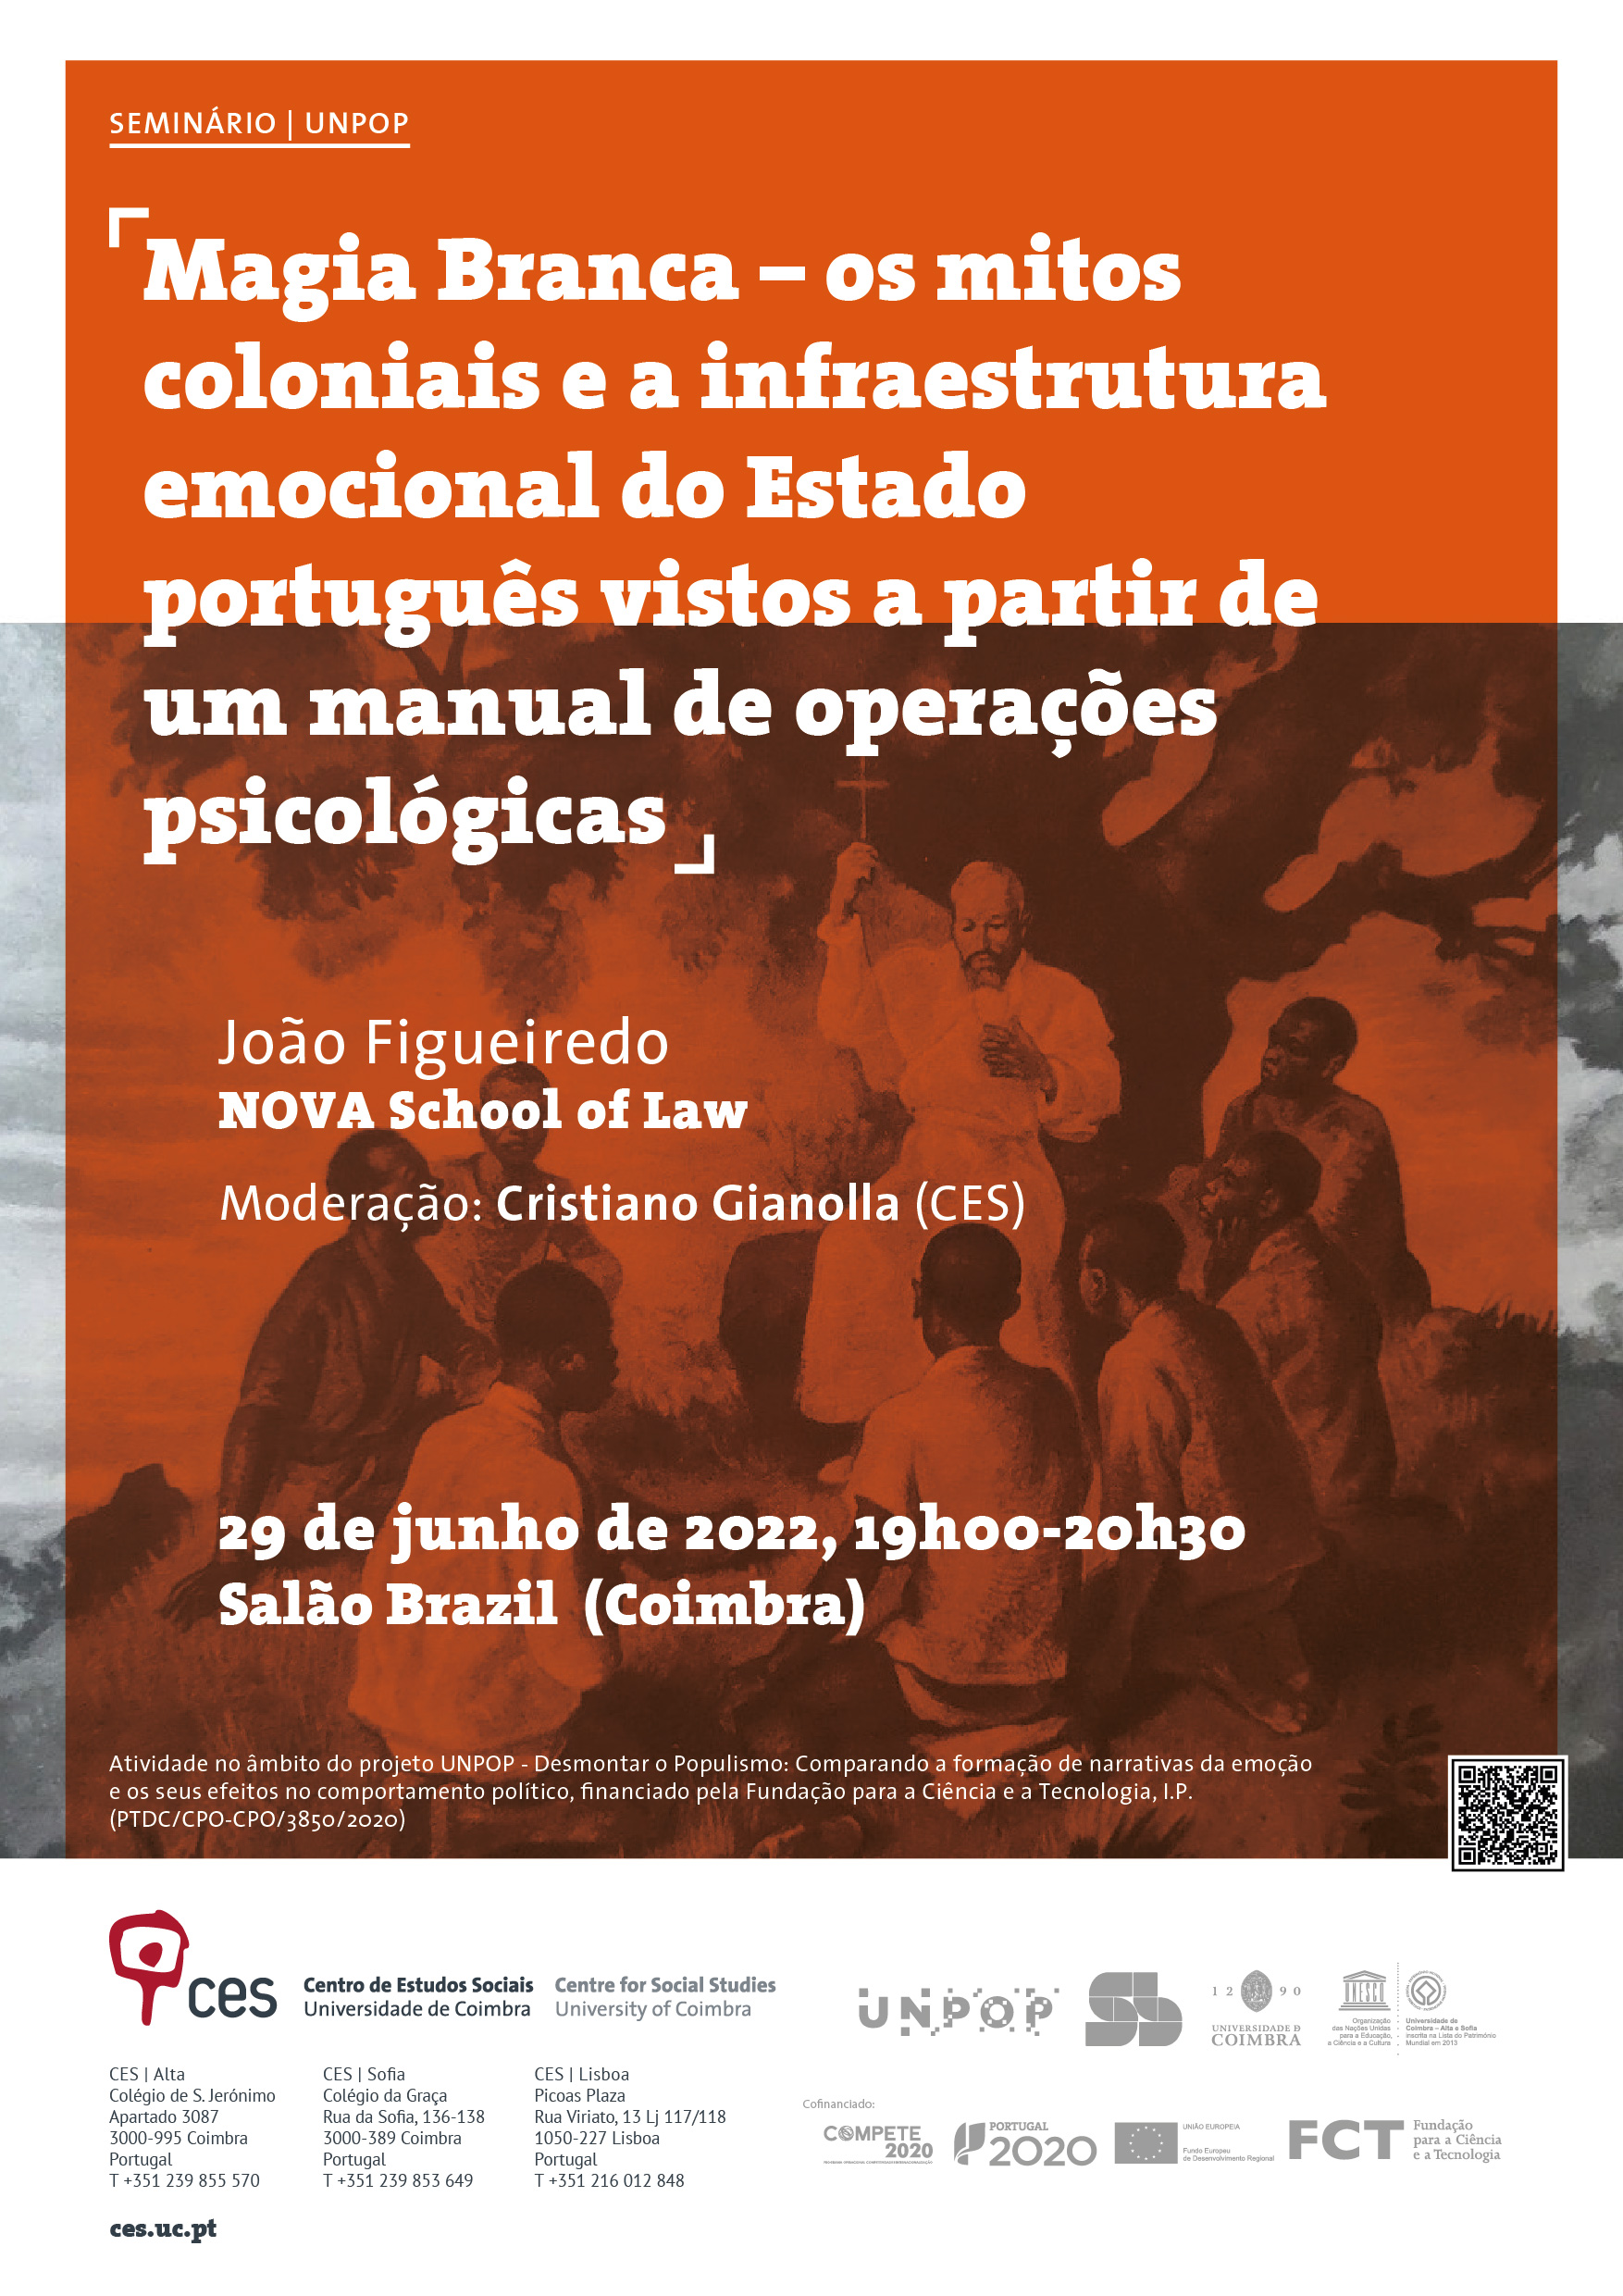 White Magic - the colonial myths and the emotional infrastructure of the Portuguese state seen from psychological operations handbook<span id="edit_38777"><script>$(function() { $('#edit_38777').load( "/myces/user/editobj.php?tipo=evento&id=38777" ); });</script></span>